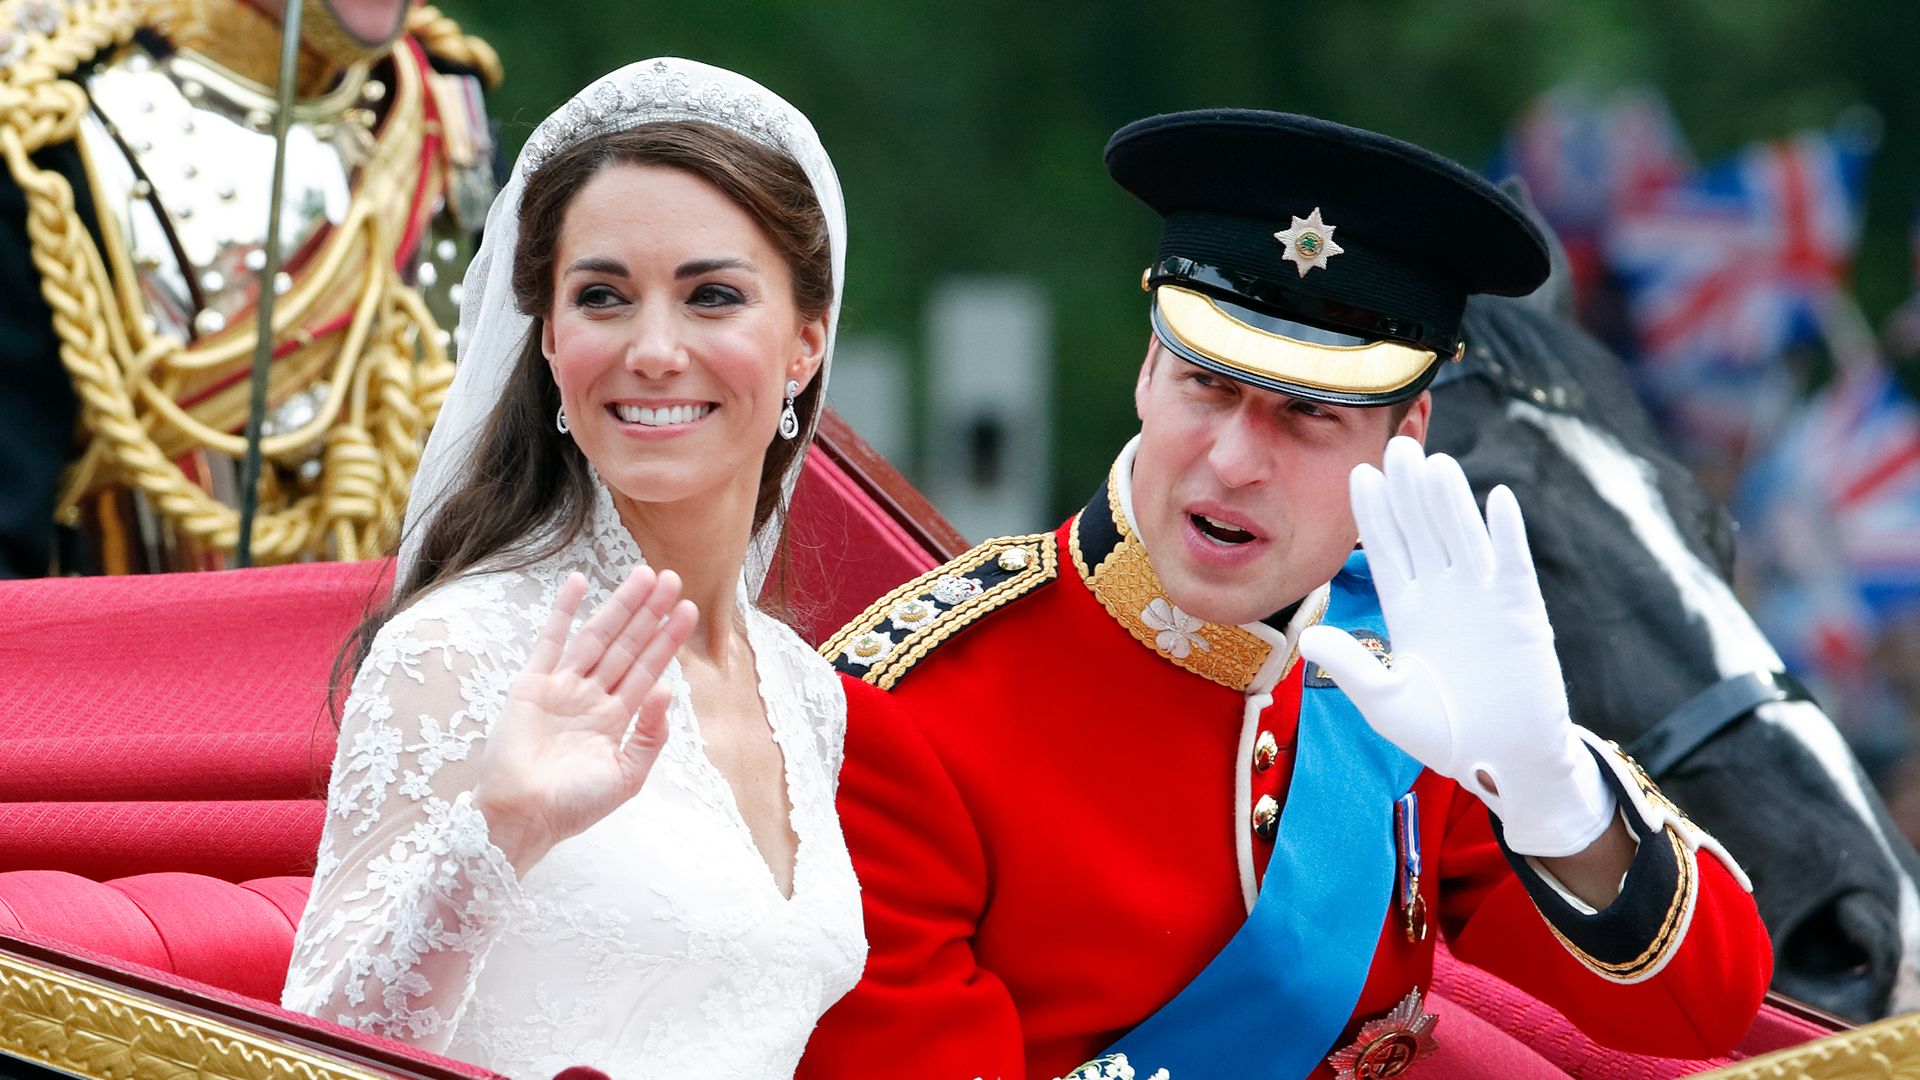 The big protocol mistake made at Prince William and Kate's wedding that everyone missed - watch